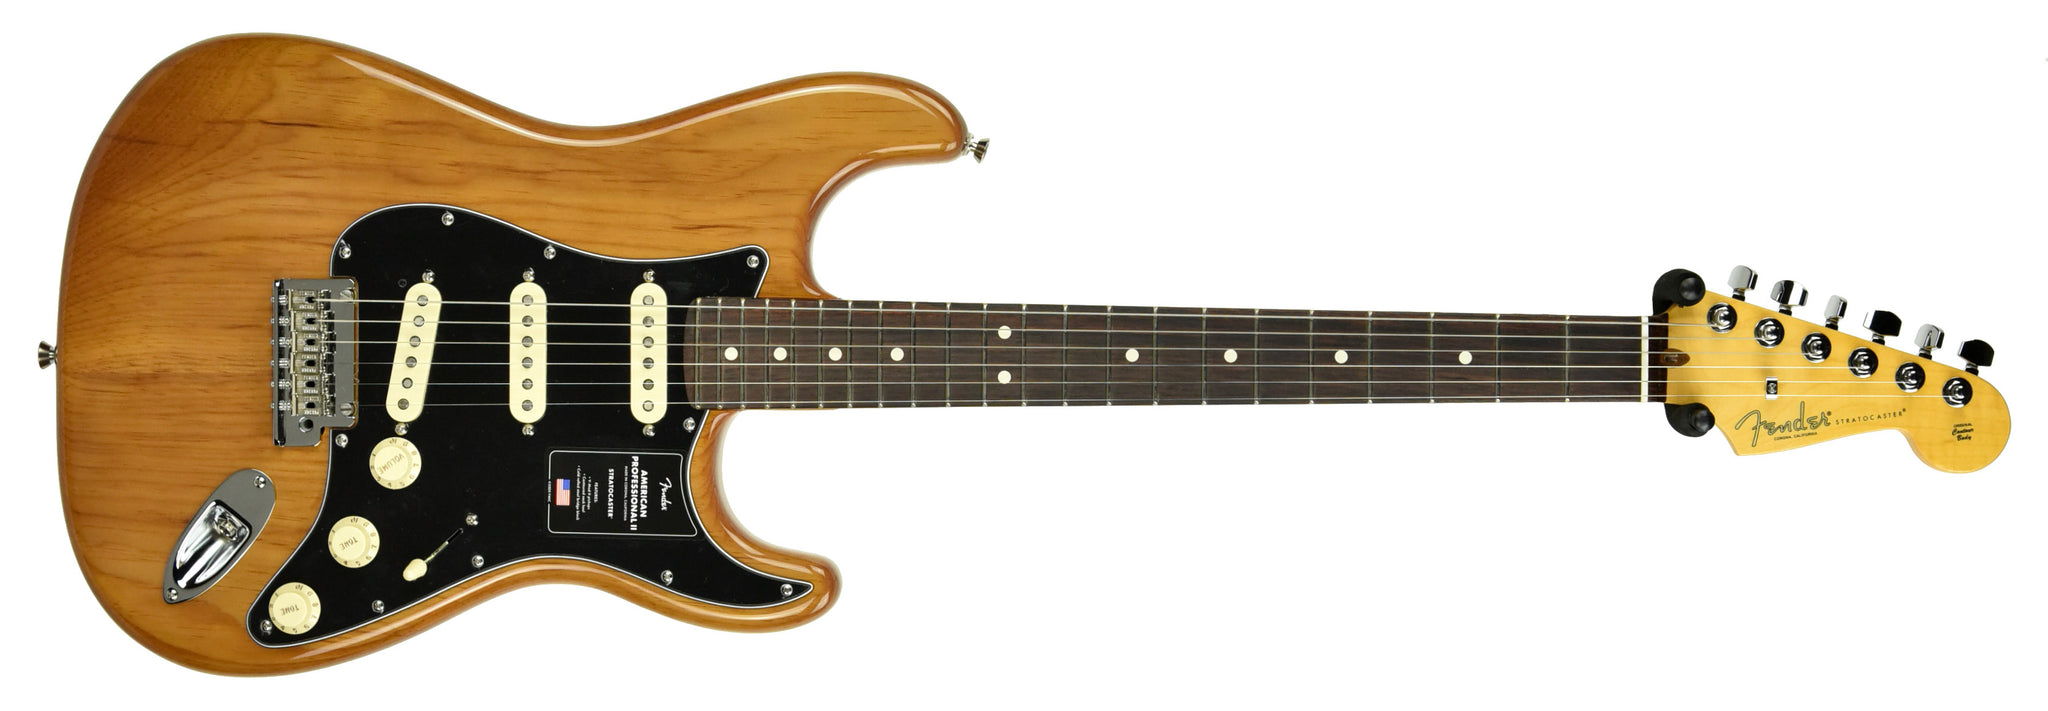 Fender American Professional II Stratocaster in Roasted Pine 